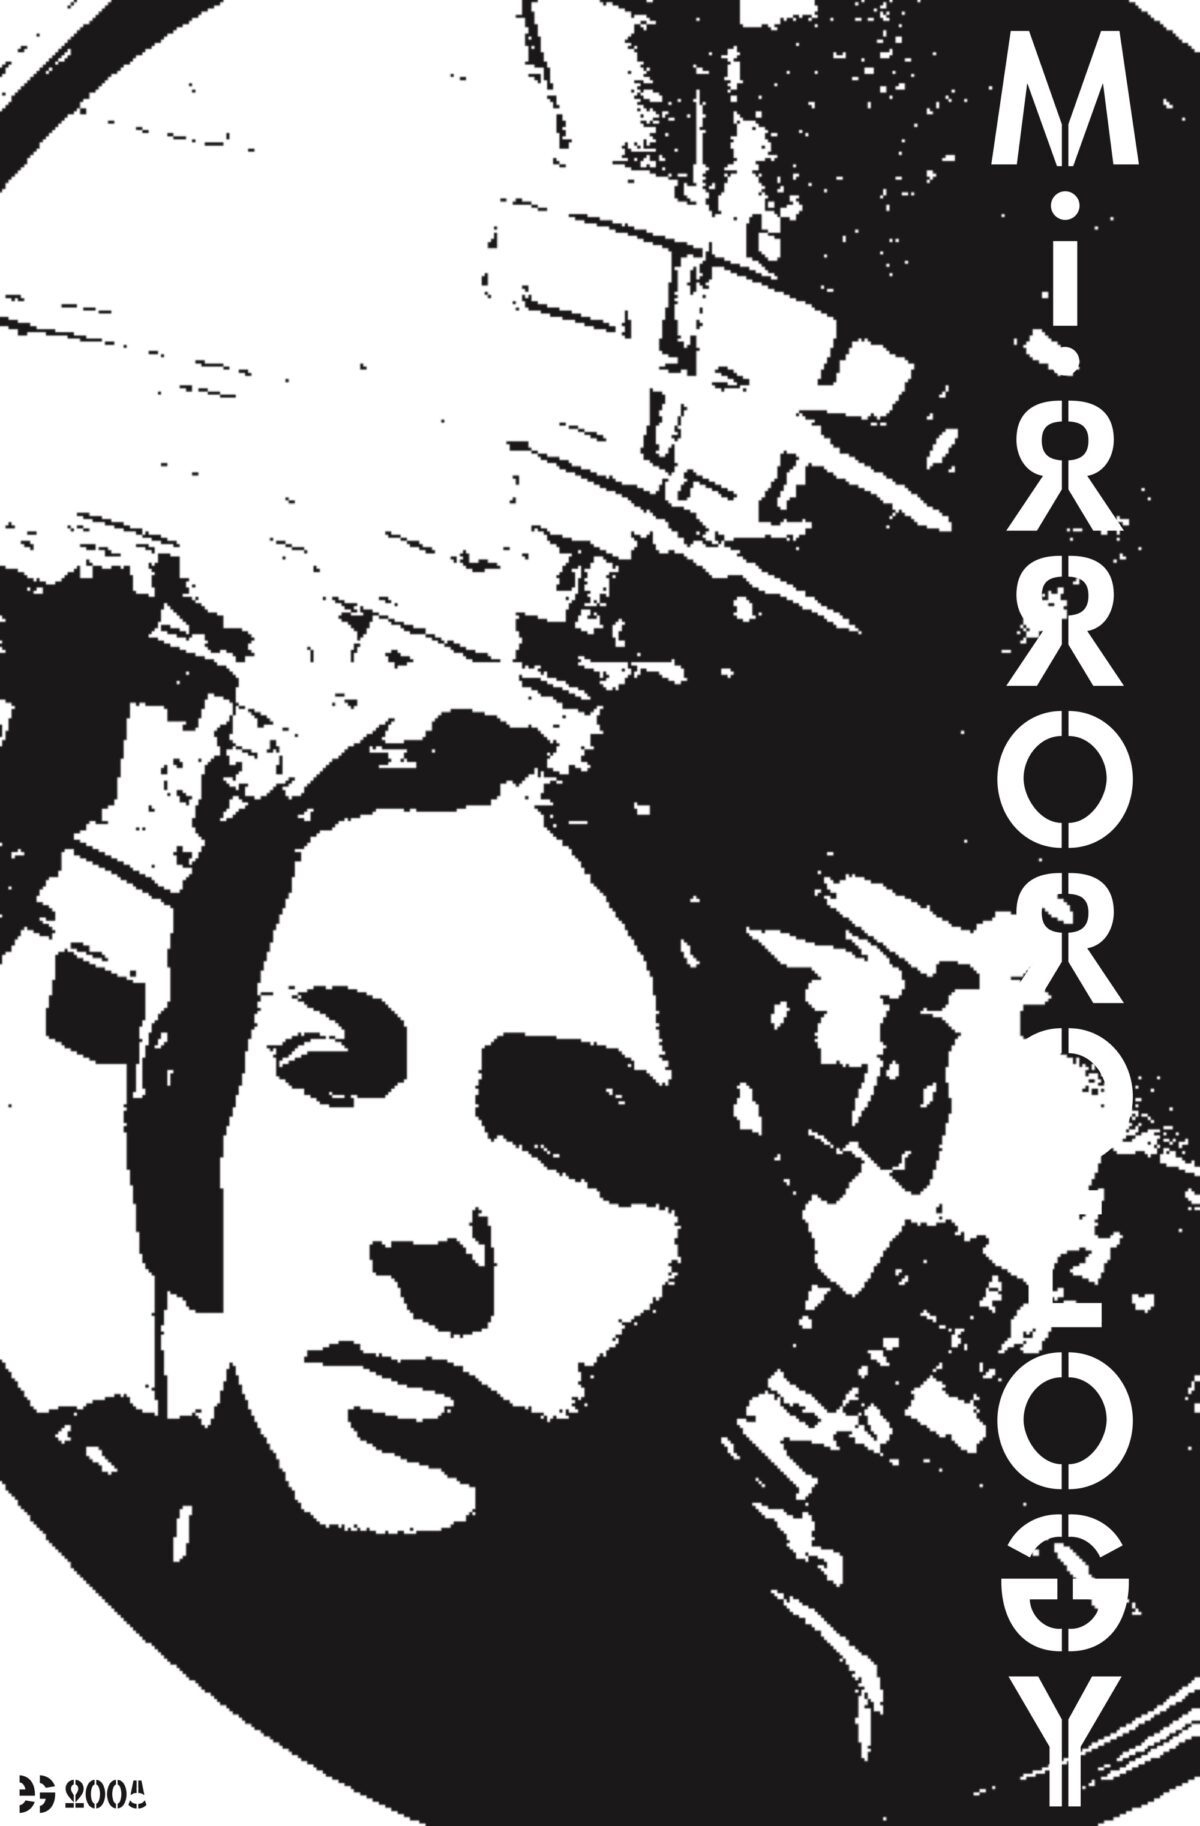 Mirrorology self-portrait circular reflection, reduced fidelity (high contrast greyscale on white background)